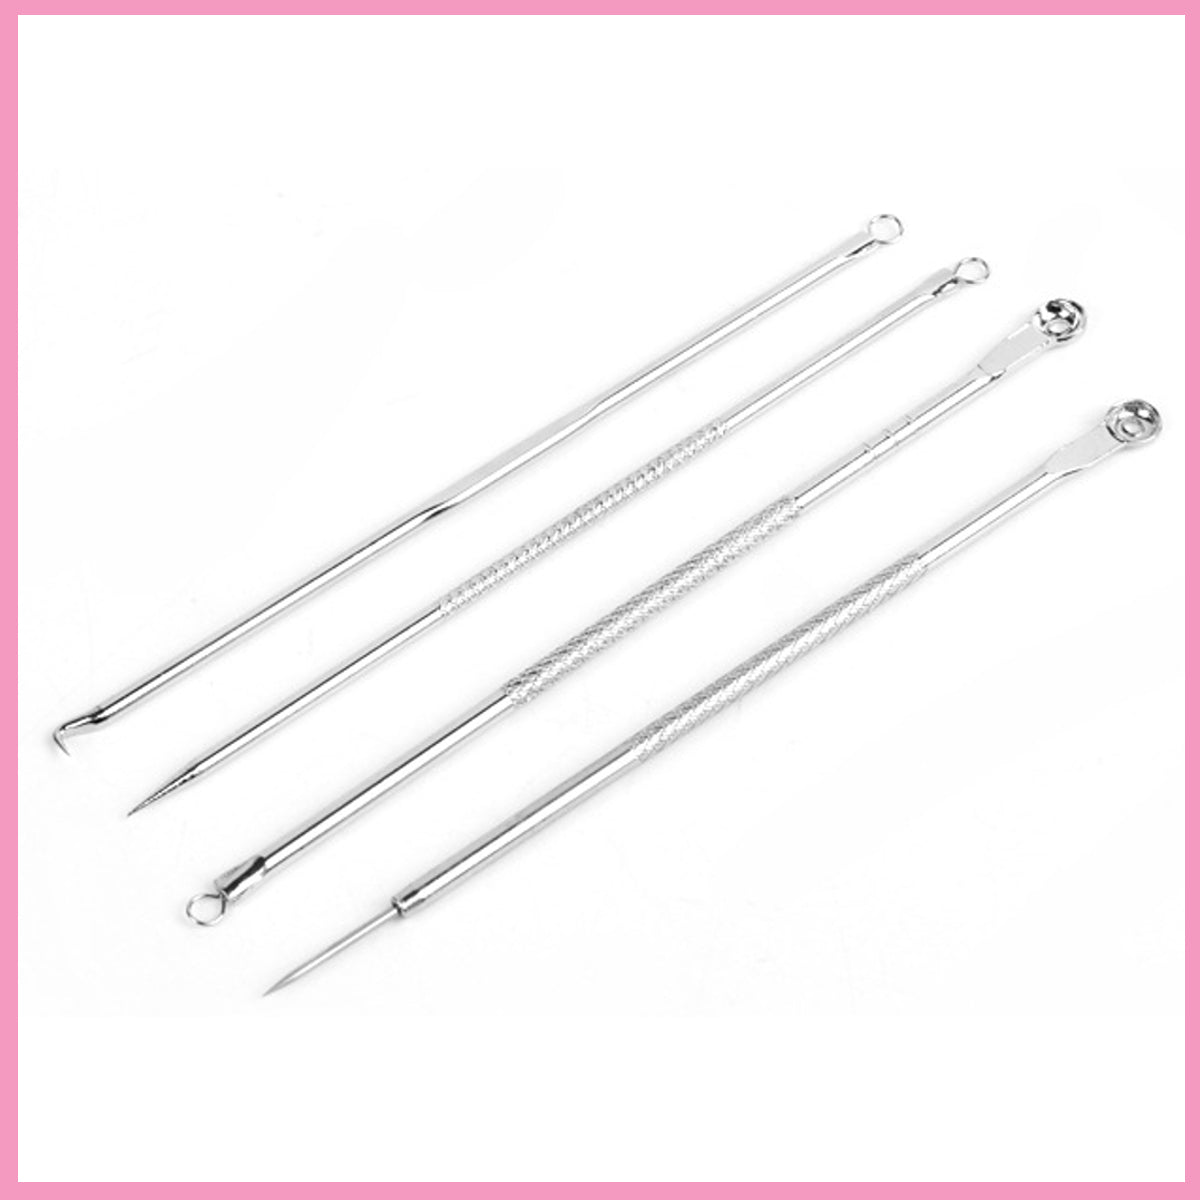 Acne Needle Set 4PCS Blackhead Acne Remover Extractor Pimple Comedone Removal Tool Kit for Facial Care Skin